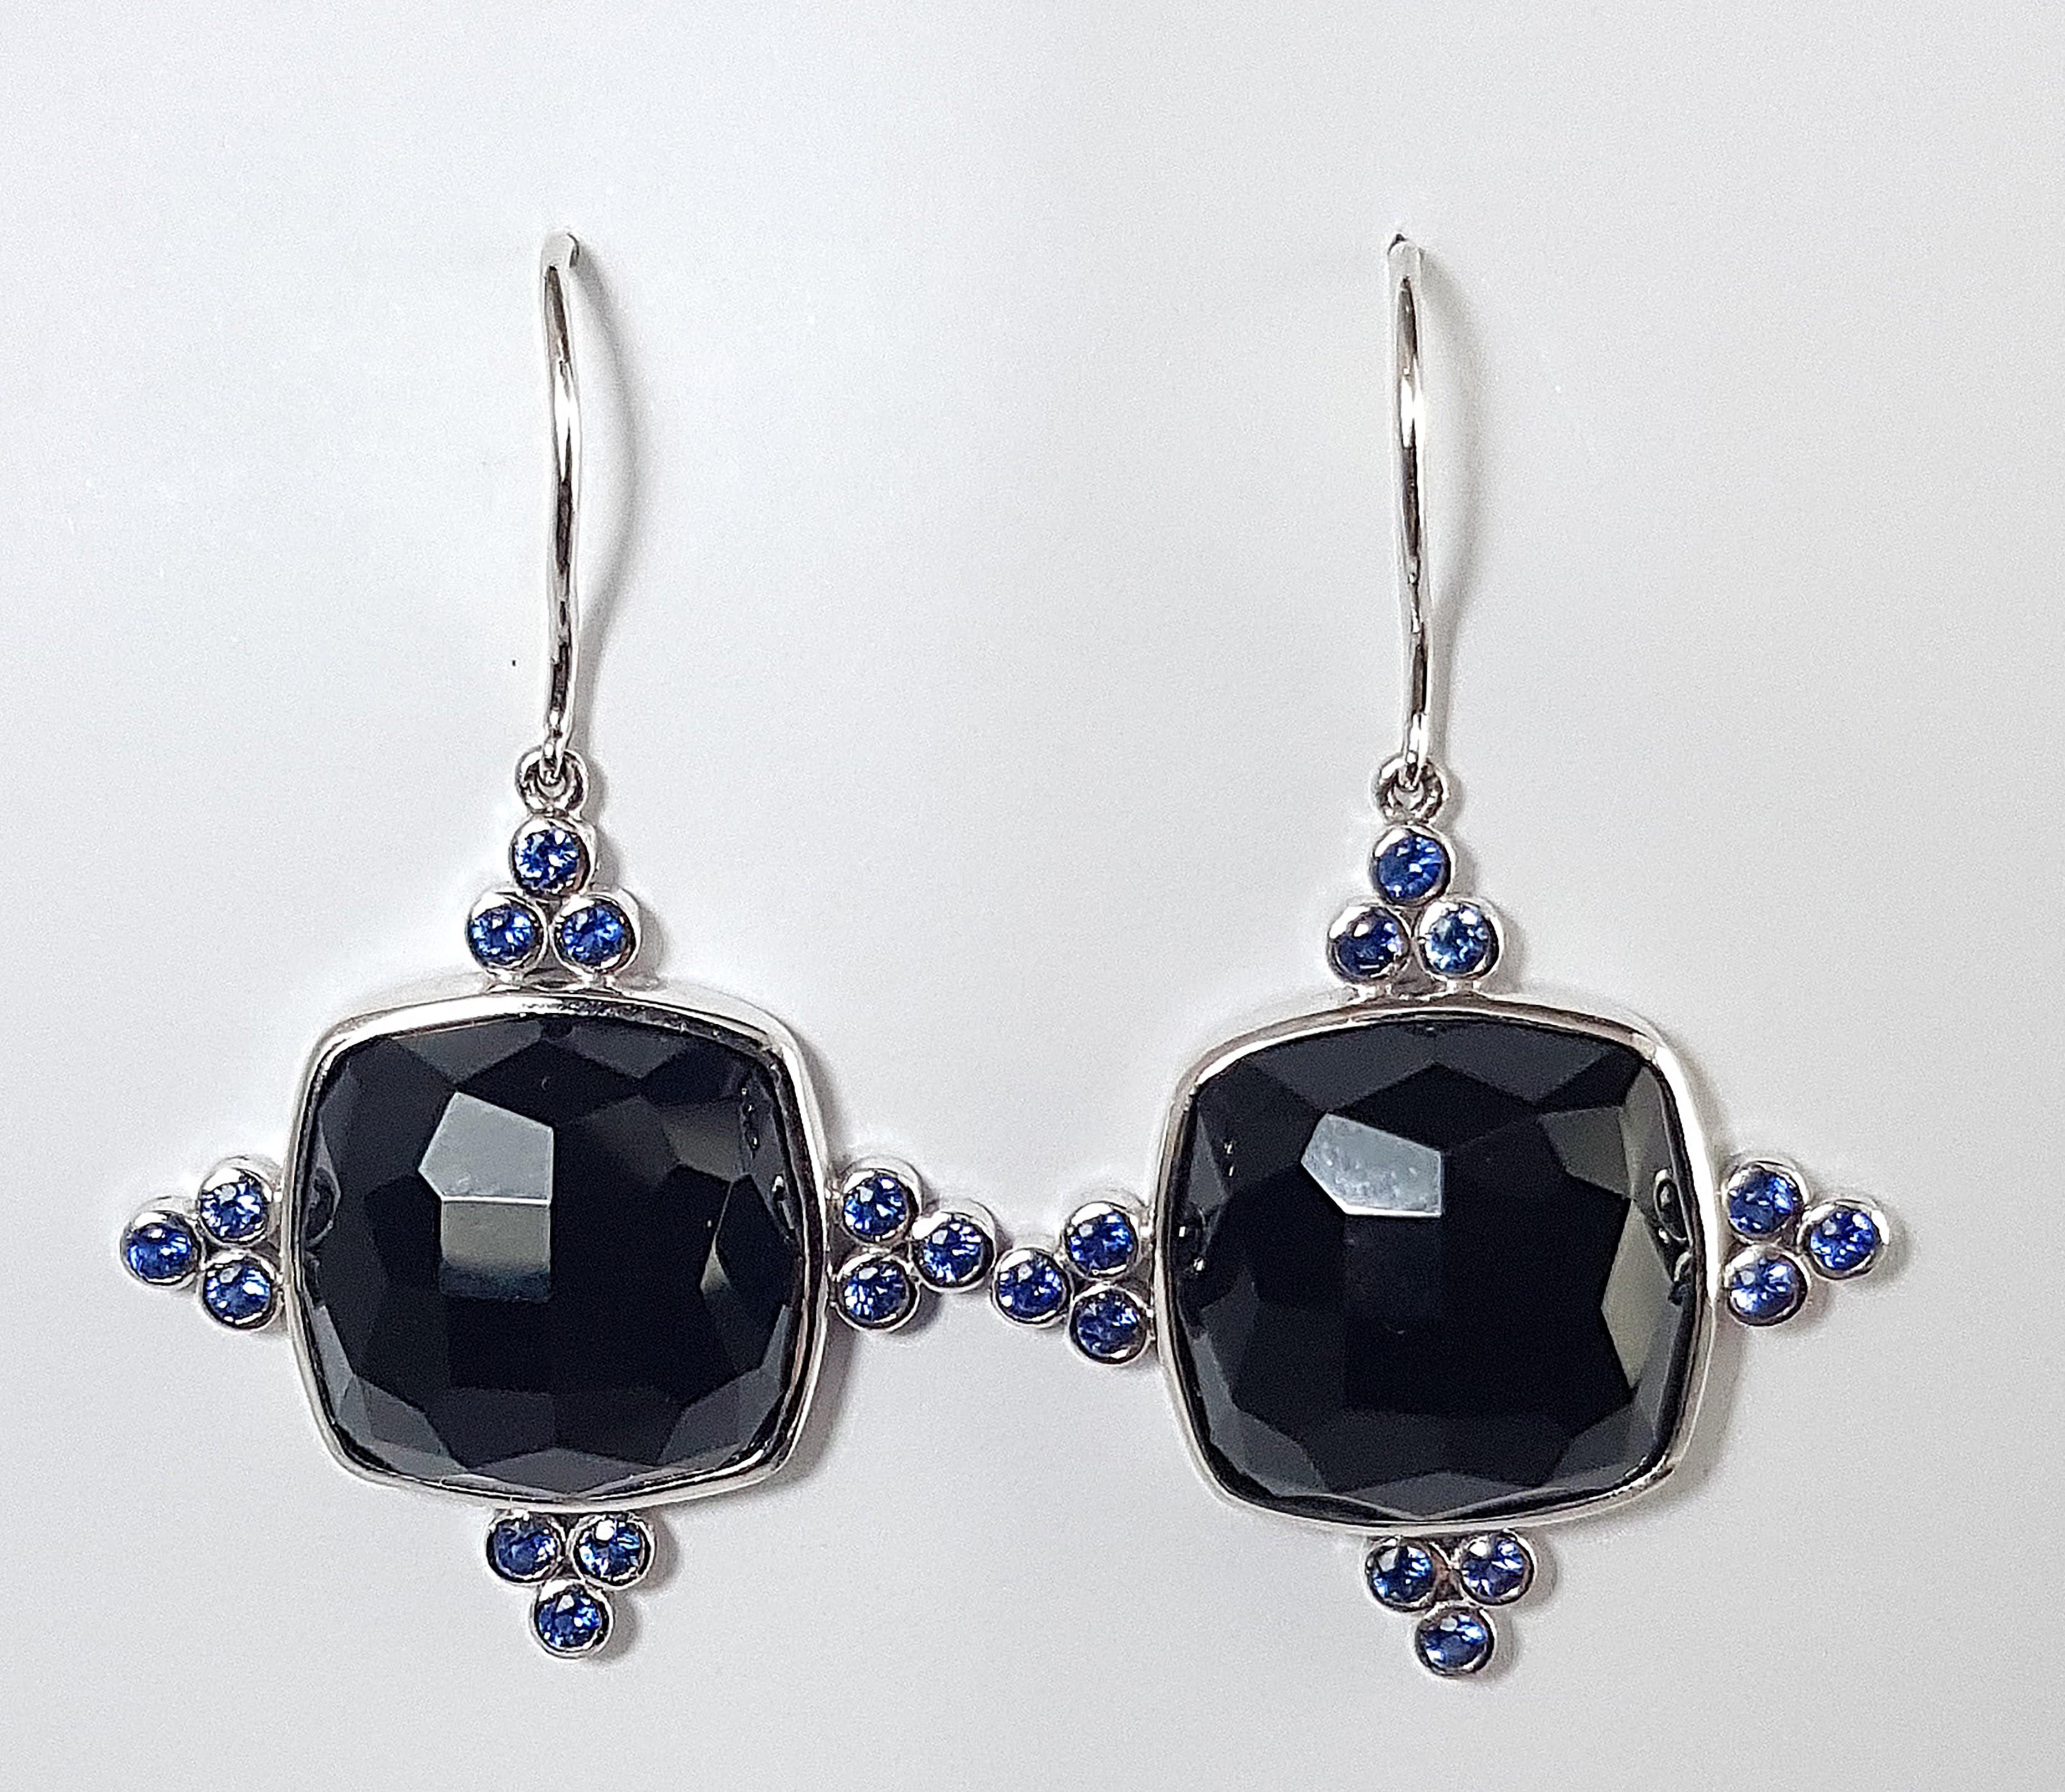 Onyx with Blue Sapphire 1.0 carat Earrings set in 18 Karat White Gold Settings

Width:  2.7 cm 
Length: 4.5 cm
Total Weight: 12.76 grams

